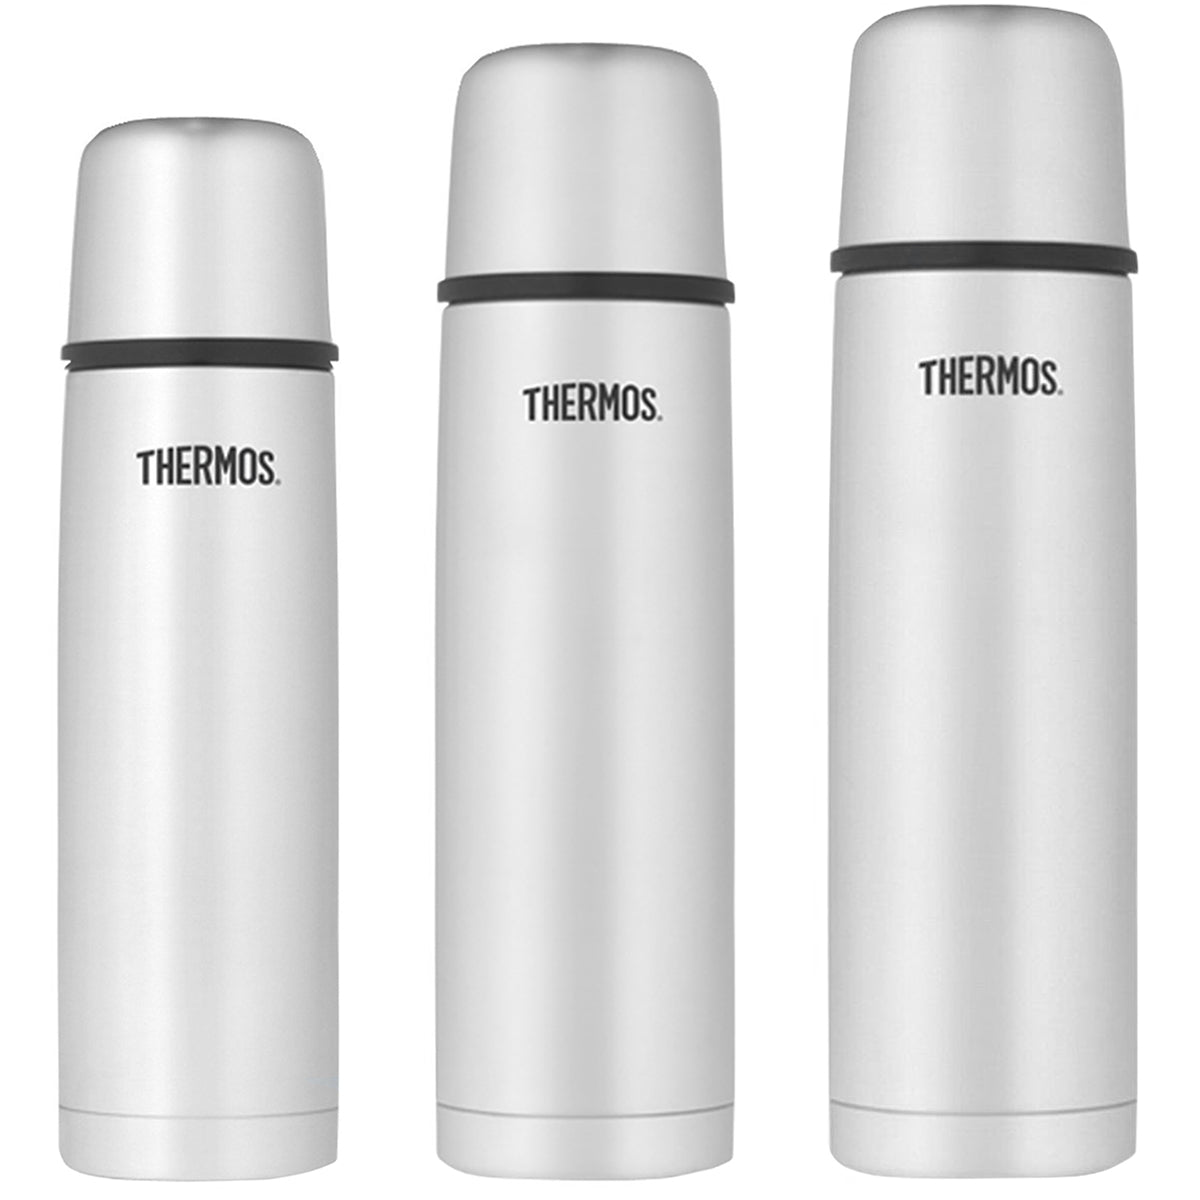 Thermos Vacuum Insulated Stainless Steel Compact Beverage Bottle Thermos